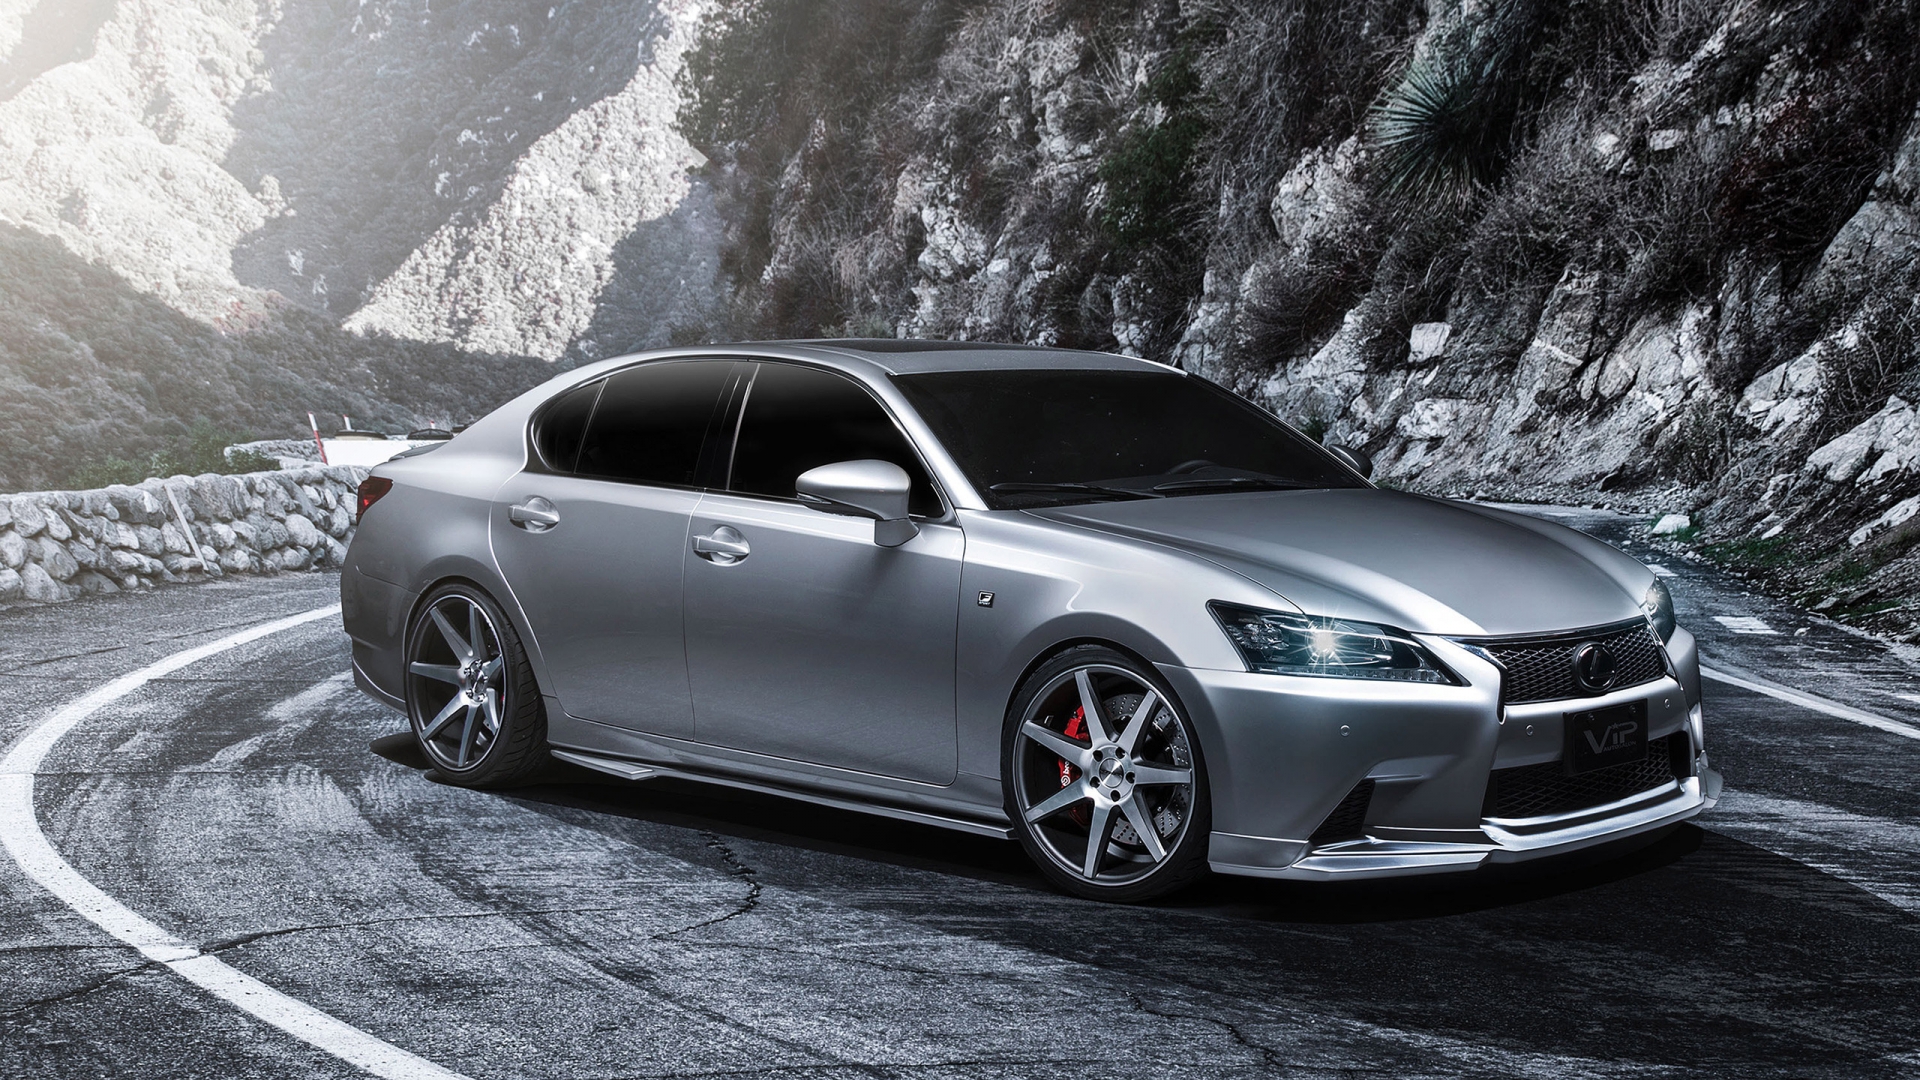 Supercharged 2013 Lexus GS 350 for 1920 x 1080 HDTV 1080p resolution